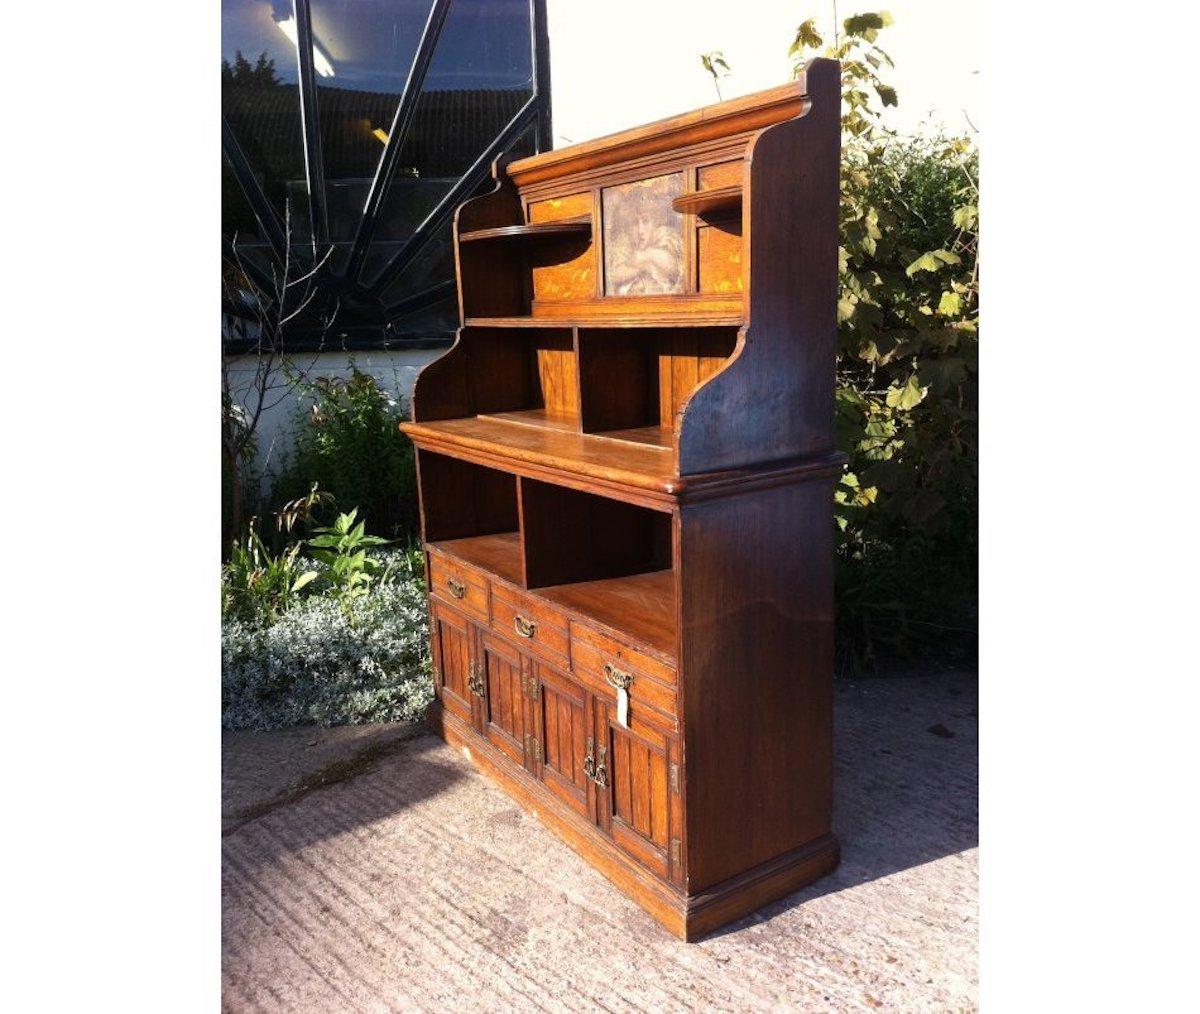 A good aesthetic movement oak bookcase or sideboard with a wonderful period oil painting on canvas to the top depicting a Pre-Raphaelite head and arms of a child in the style of Dante Gabriel Rossetti, flanked by semi-circular shelves and an open